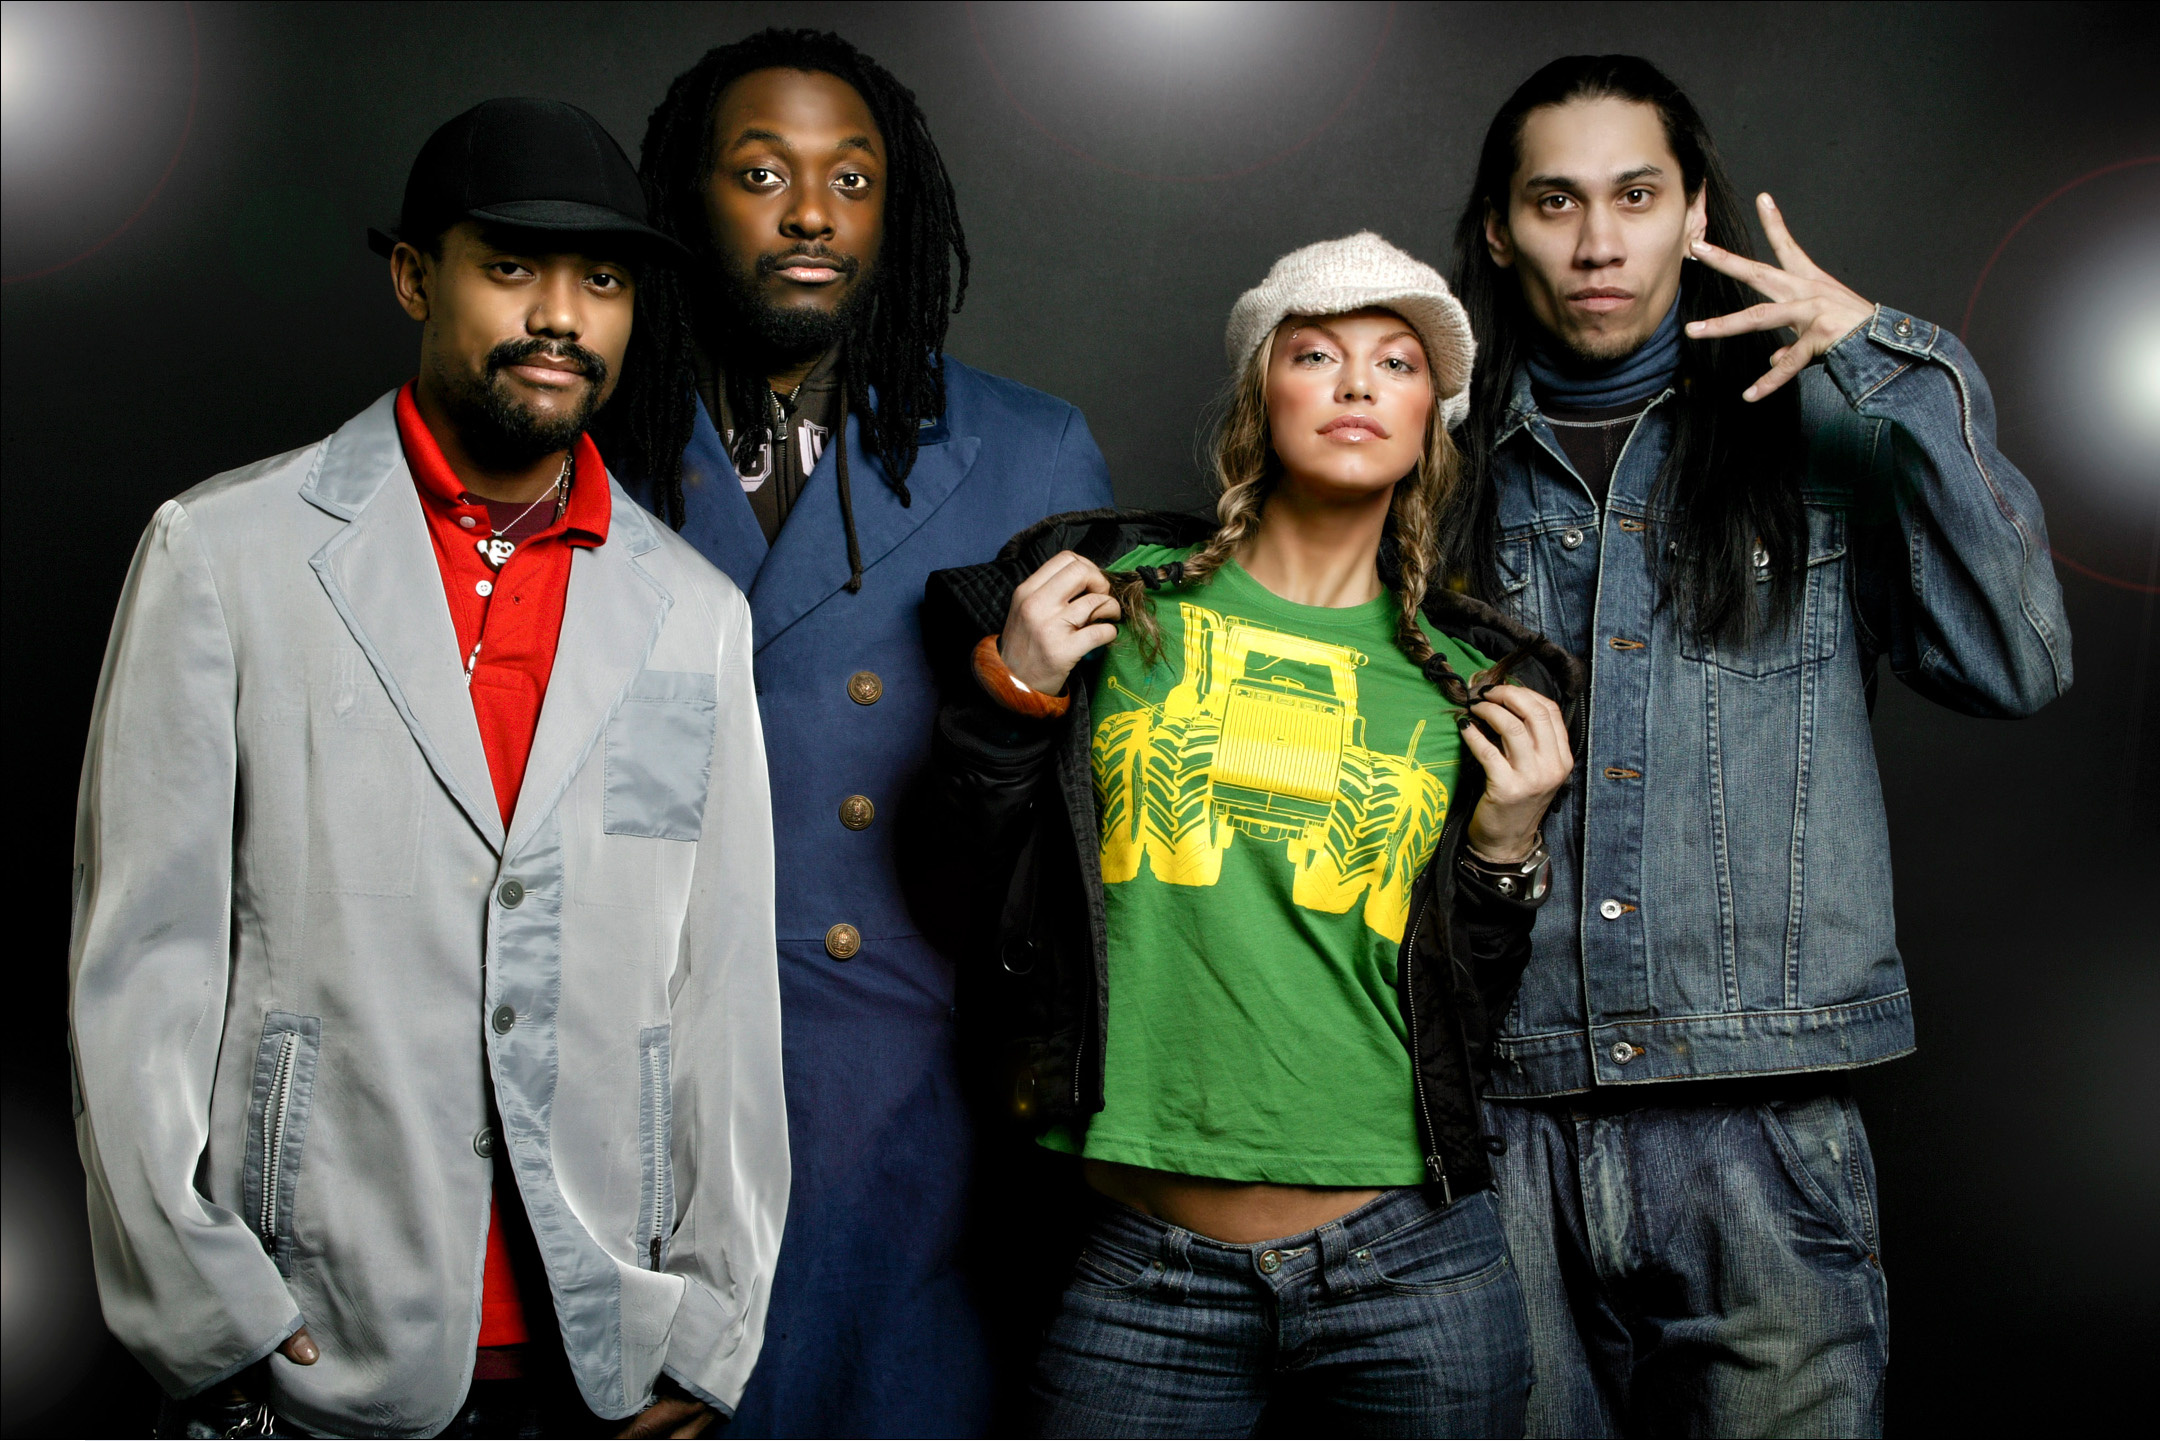 The Black Eyed Peas: Musical group with an eclectic range of styles encompassing hip-hop, dance, and pop. 2160x1450 HD Background.